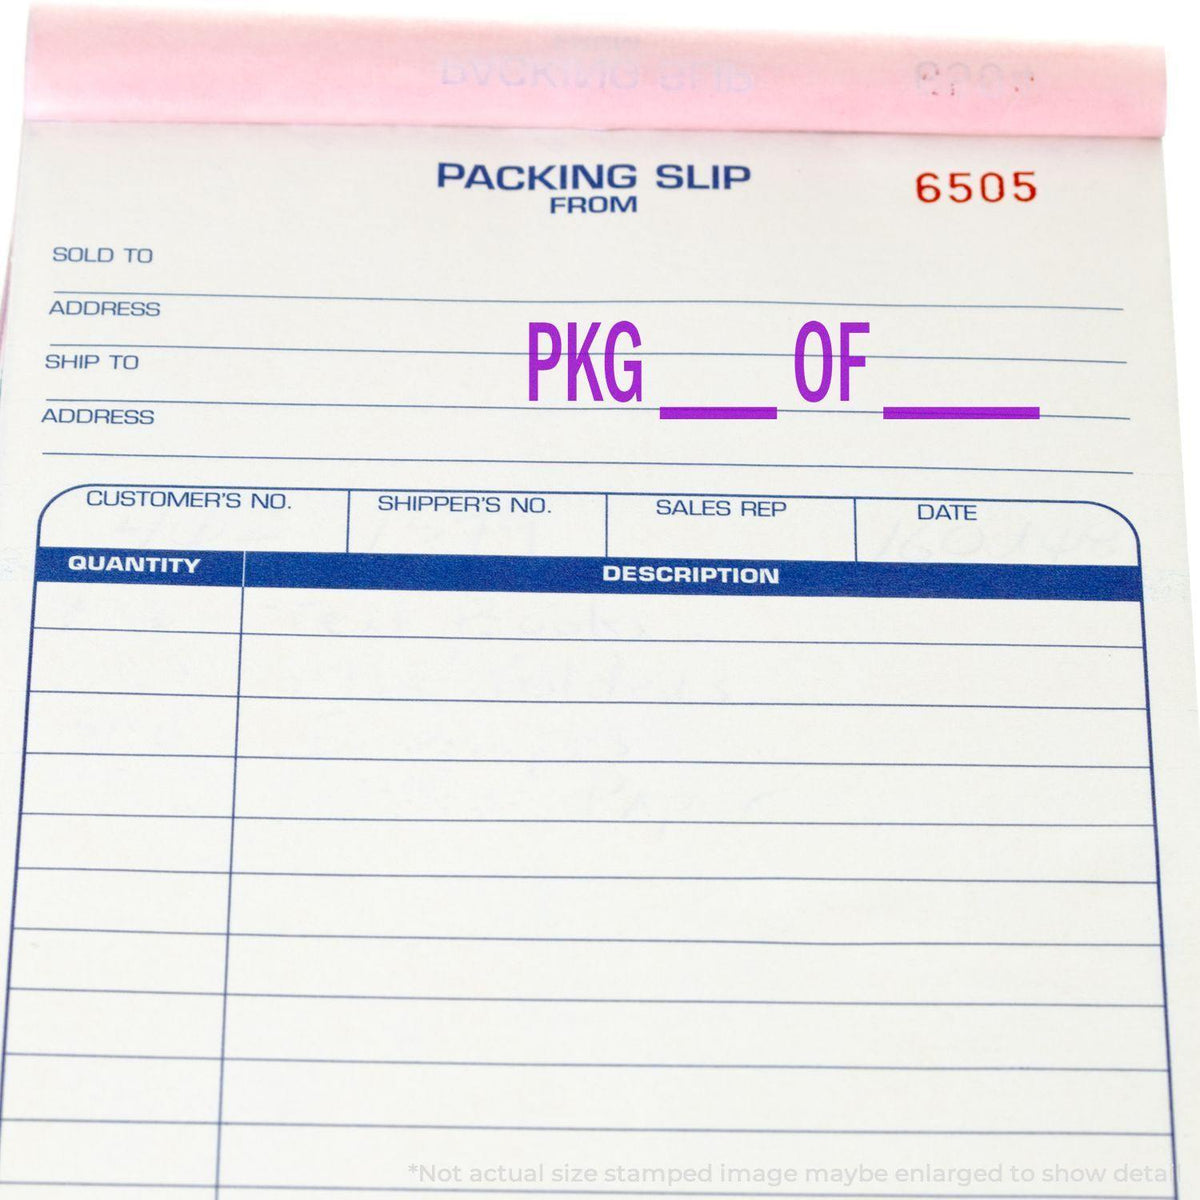 Large Self Inking Pkg Stamp - Engineer Seal Stamps - Brand_Trodat, Impression Size_Large, Stamp Type_Self-Inking Stamp, Type of Use_Postal &amp; Mailing, Type of Use_Shipping &amp; Receiving